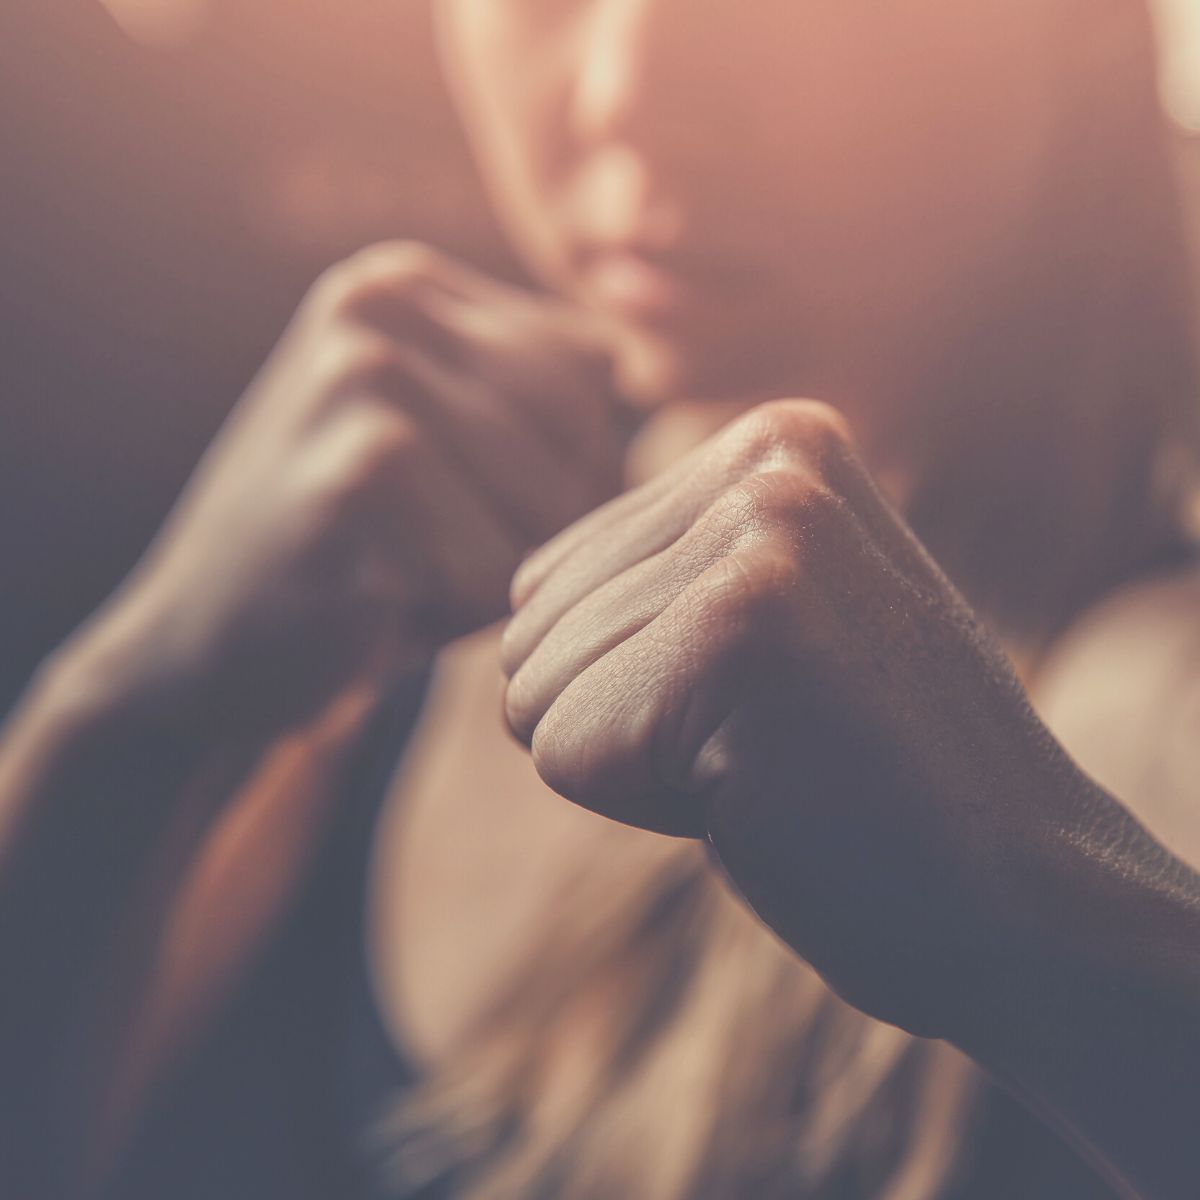 Woman with her fist raised ready for a challenge.